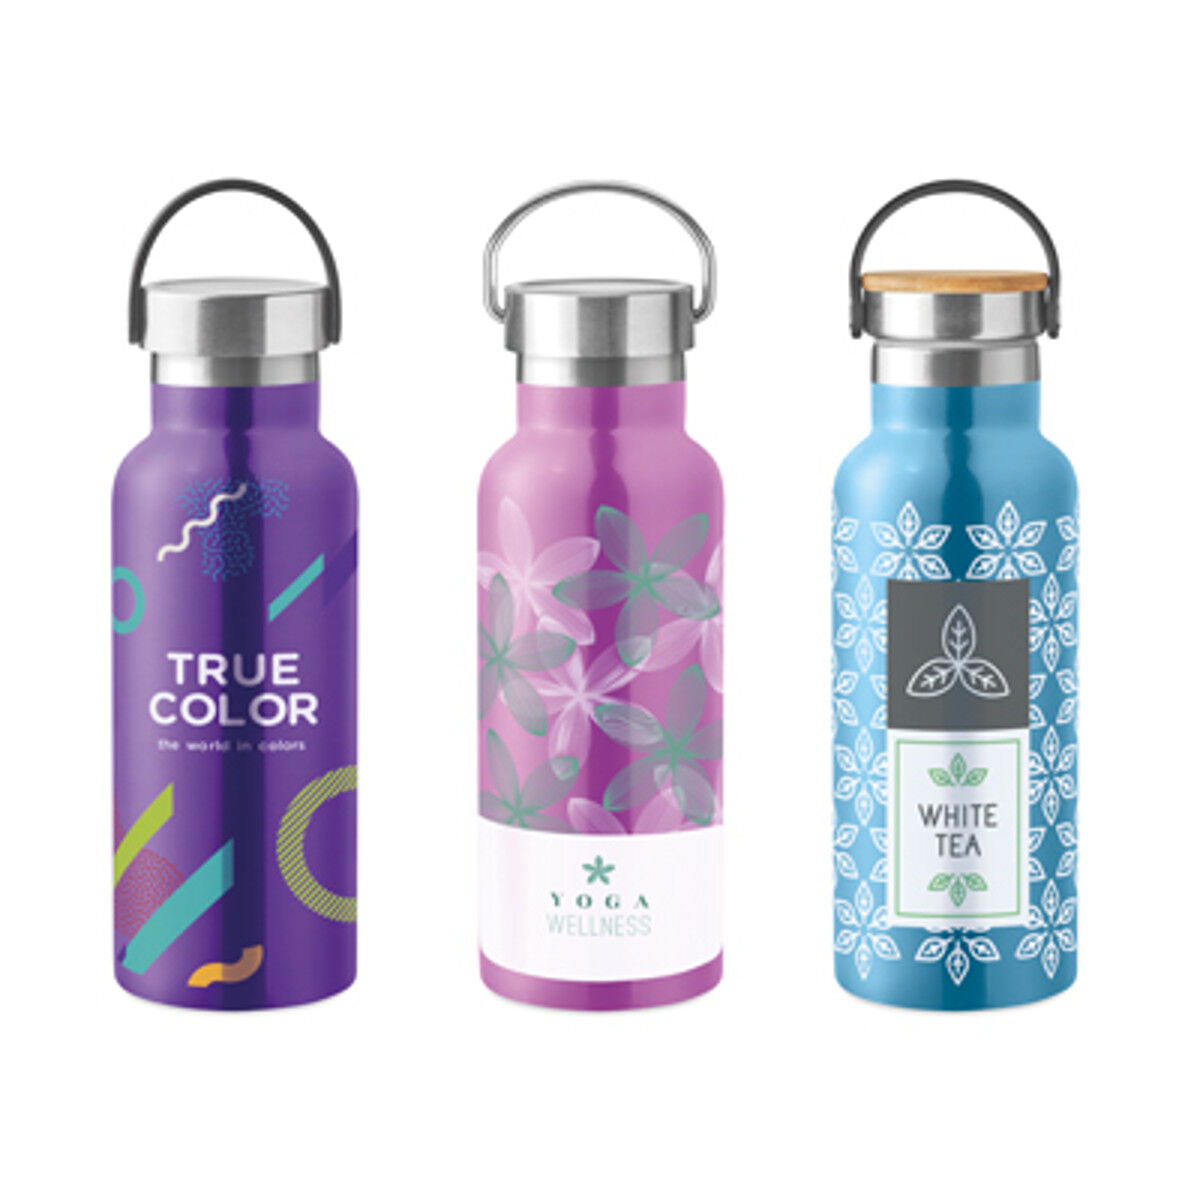 500ml Pantone Matched Water Bottle